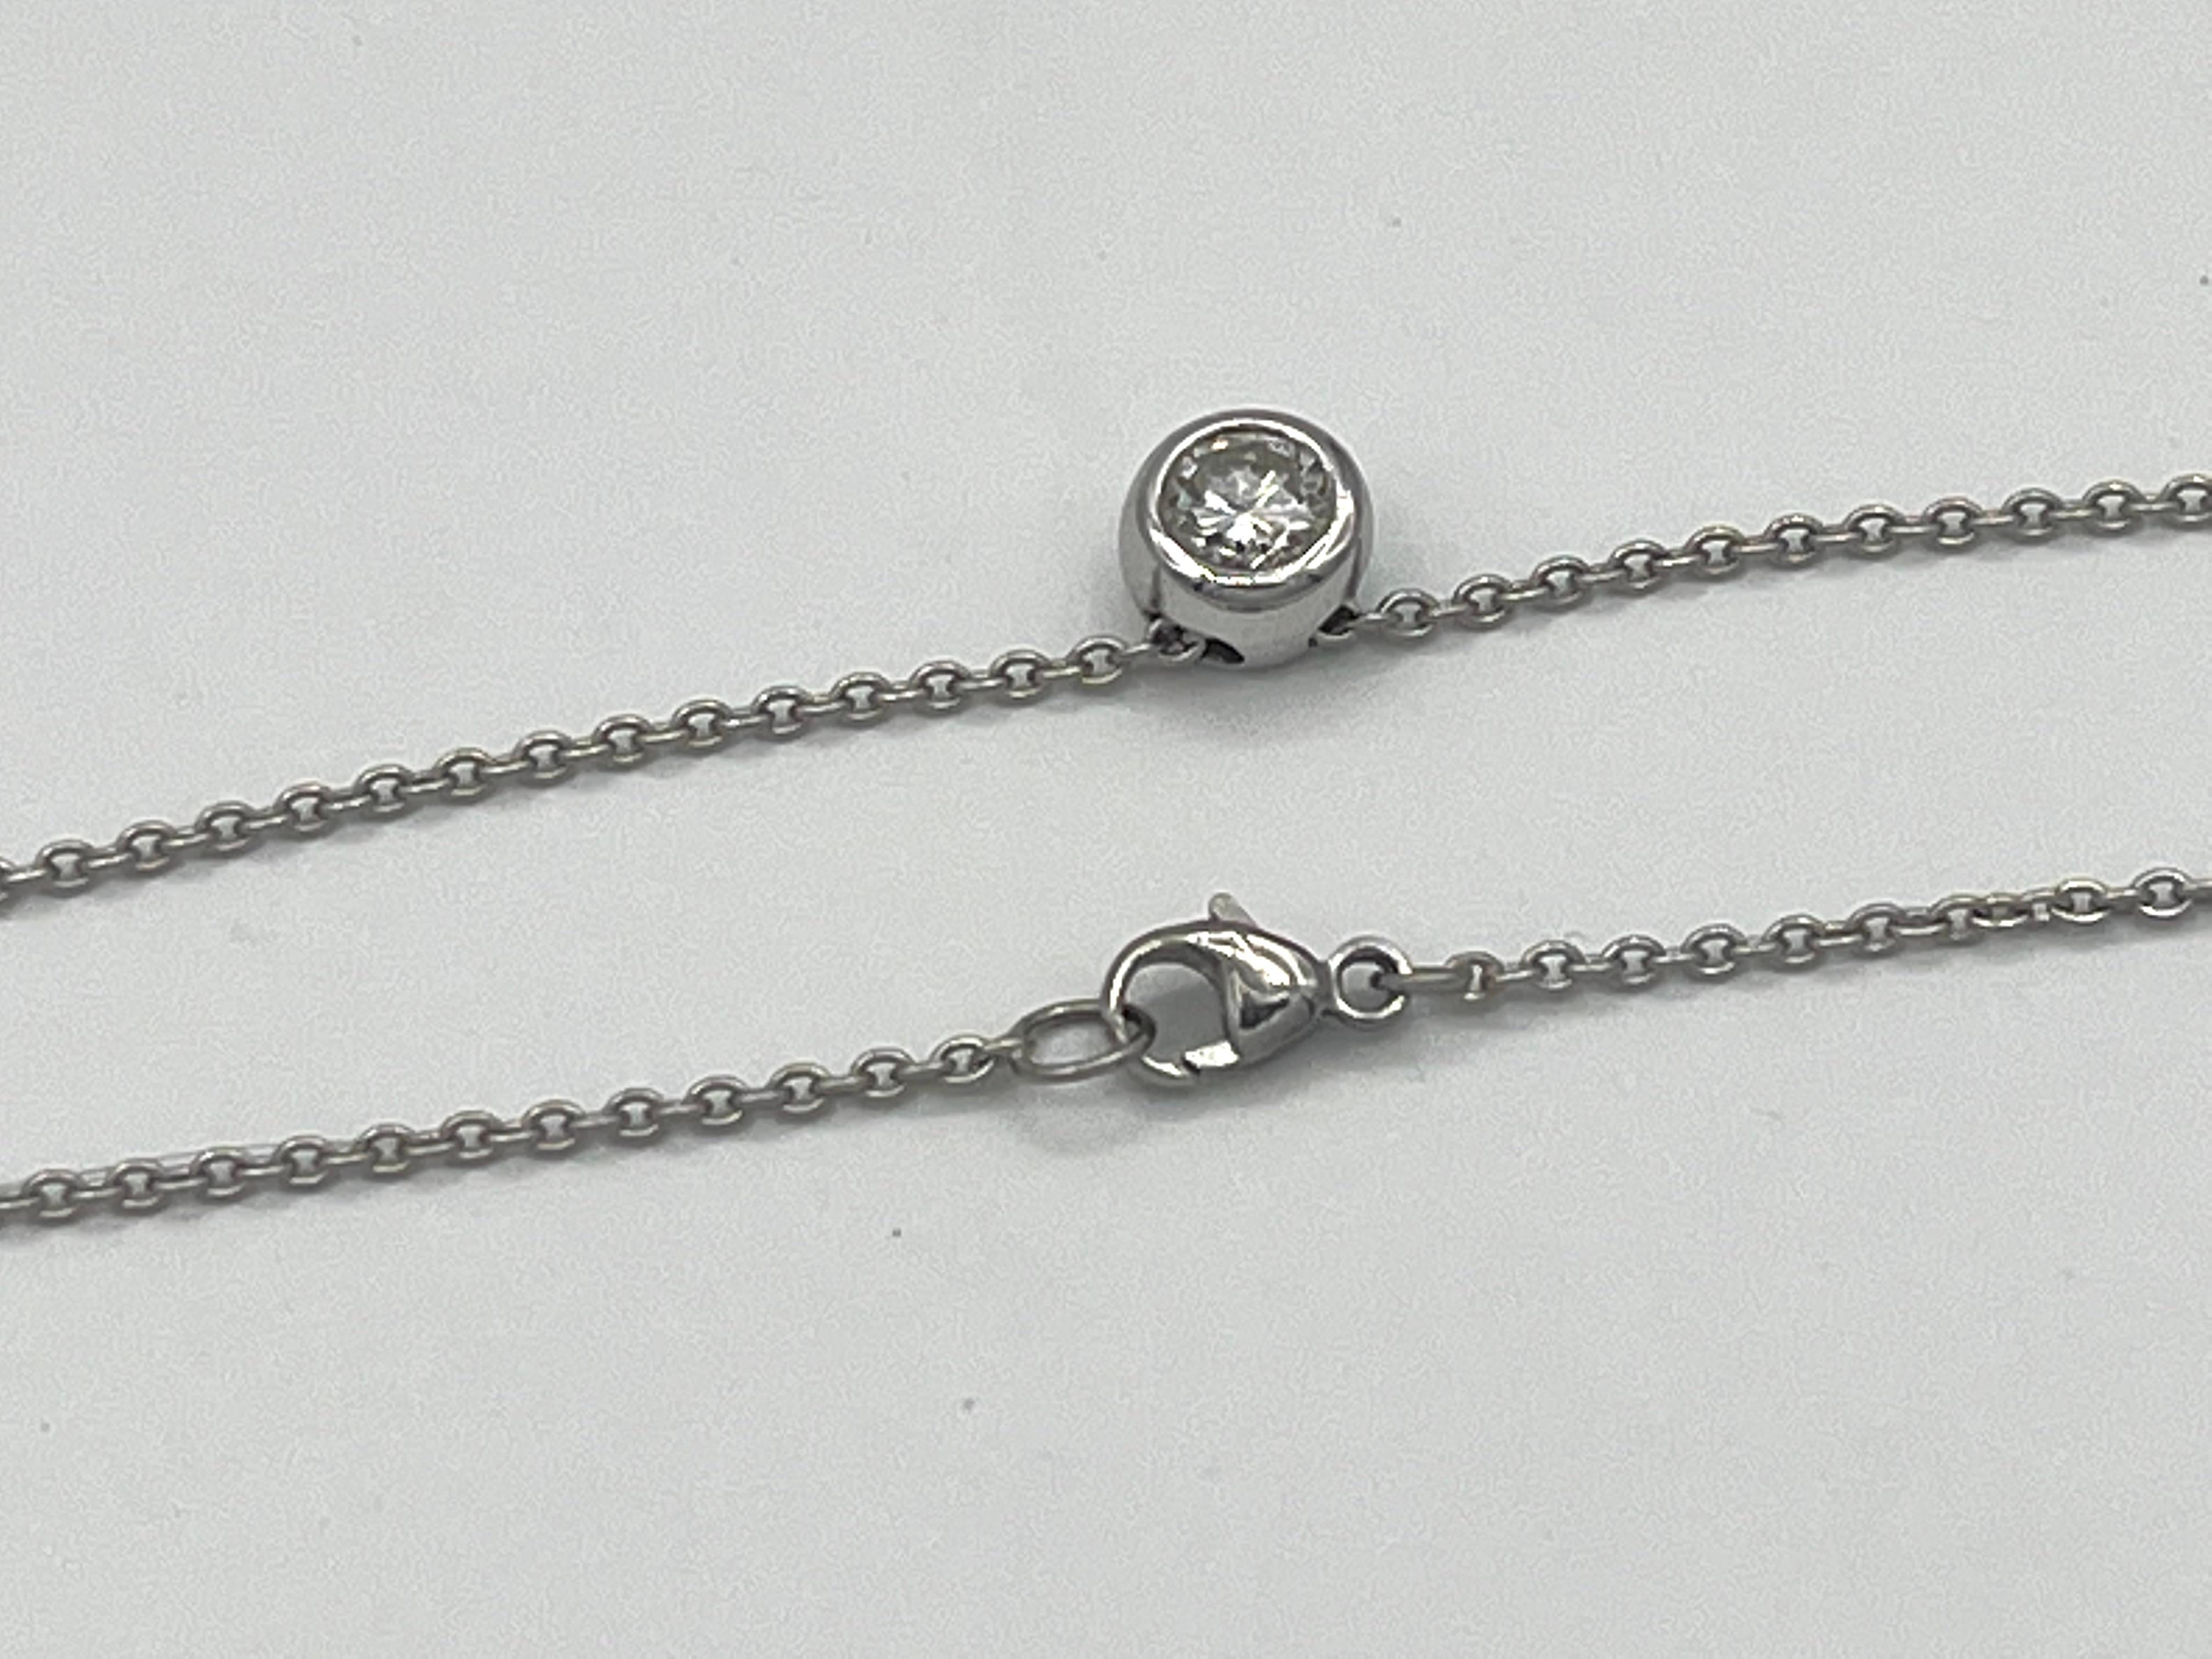 Platinum 950
hallmarked PL 950
1 Brillant 0,50 ct white, small inclusions
Chain 42 cm long
5,87 gram
stone not can come out of the chain
